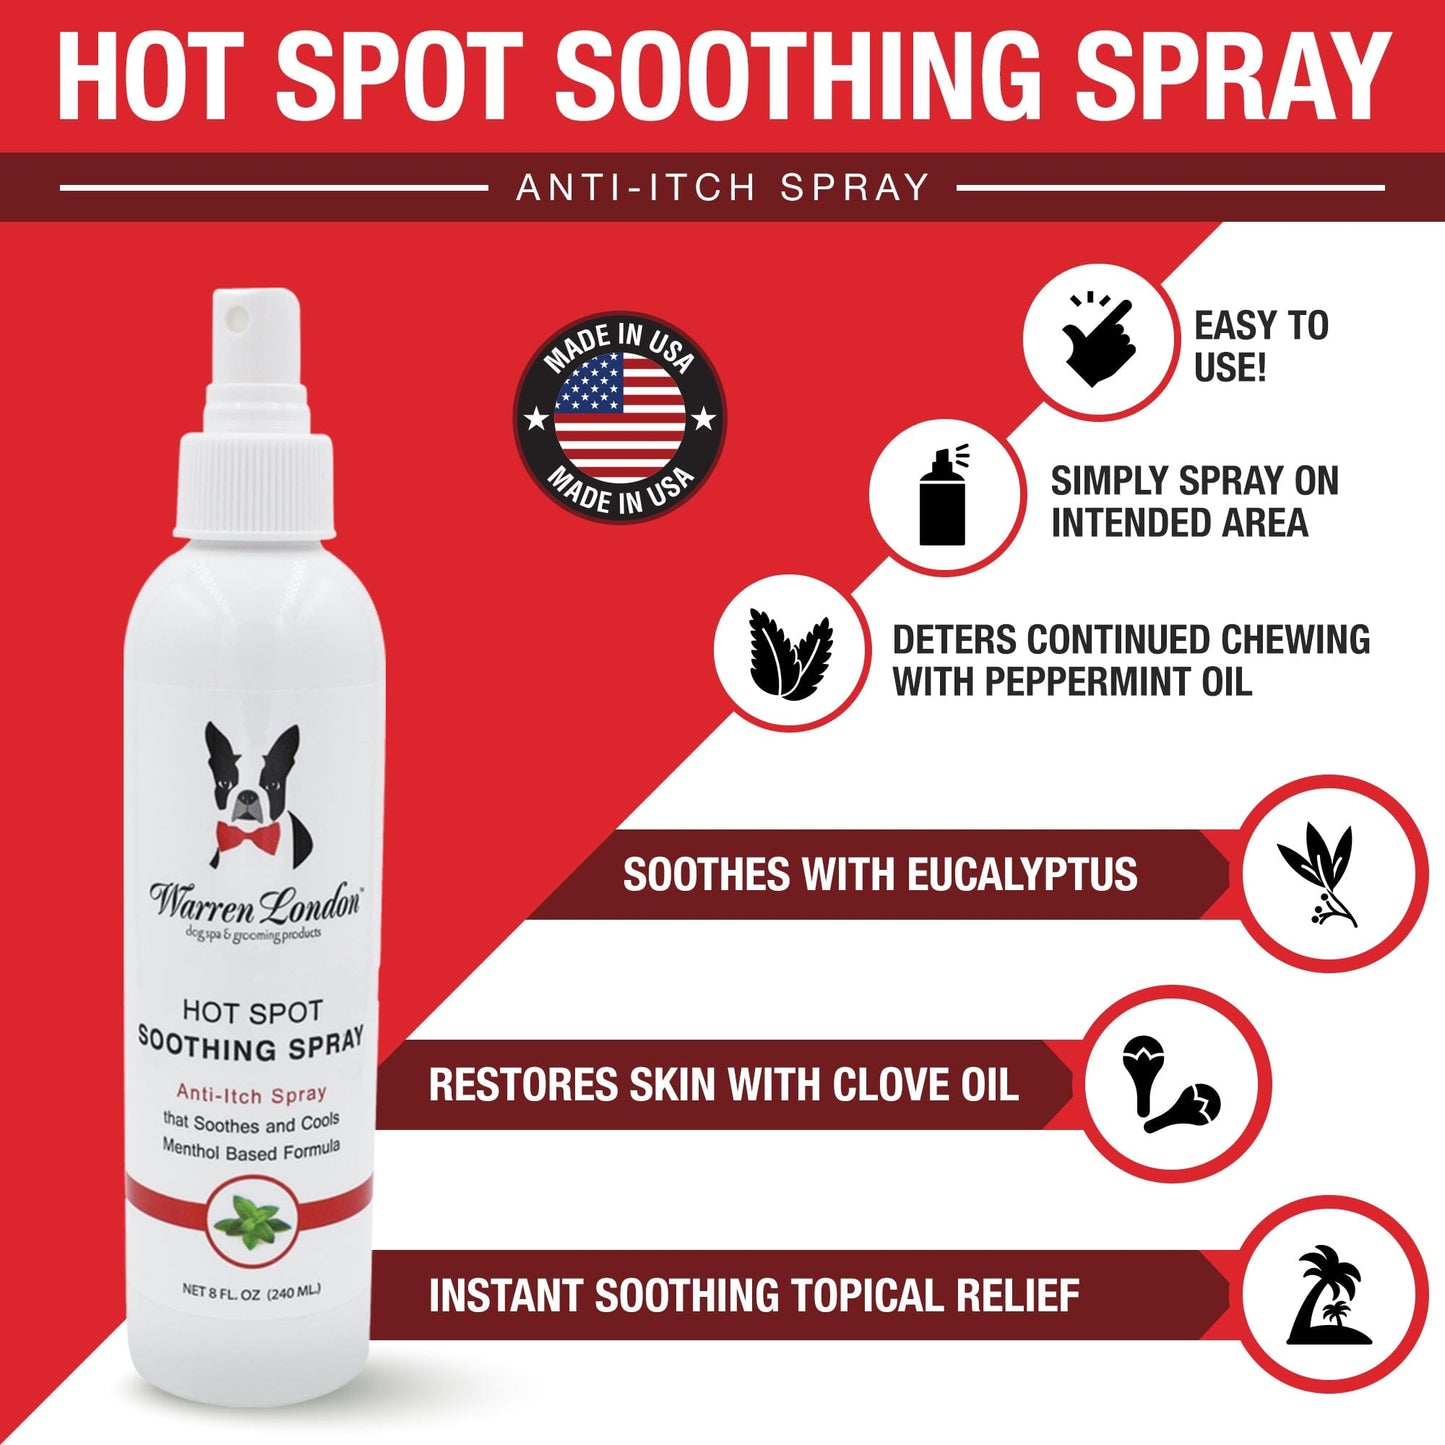 Hot Spot Soothing Spray - Professional Size